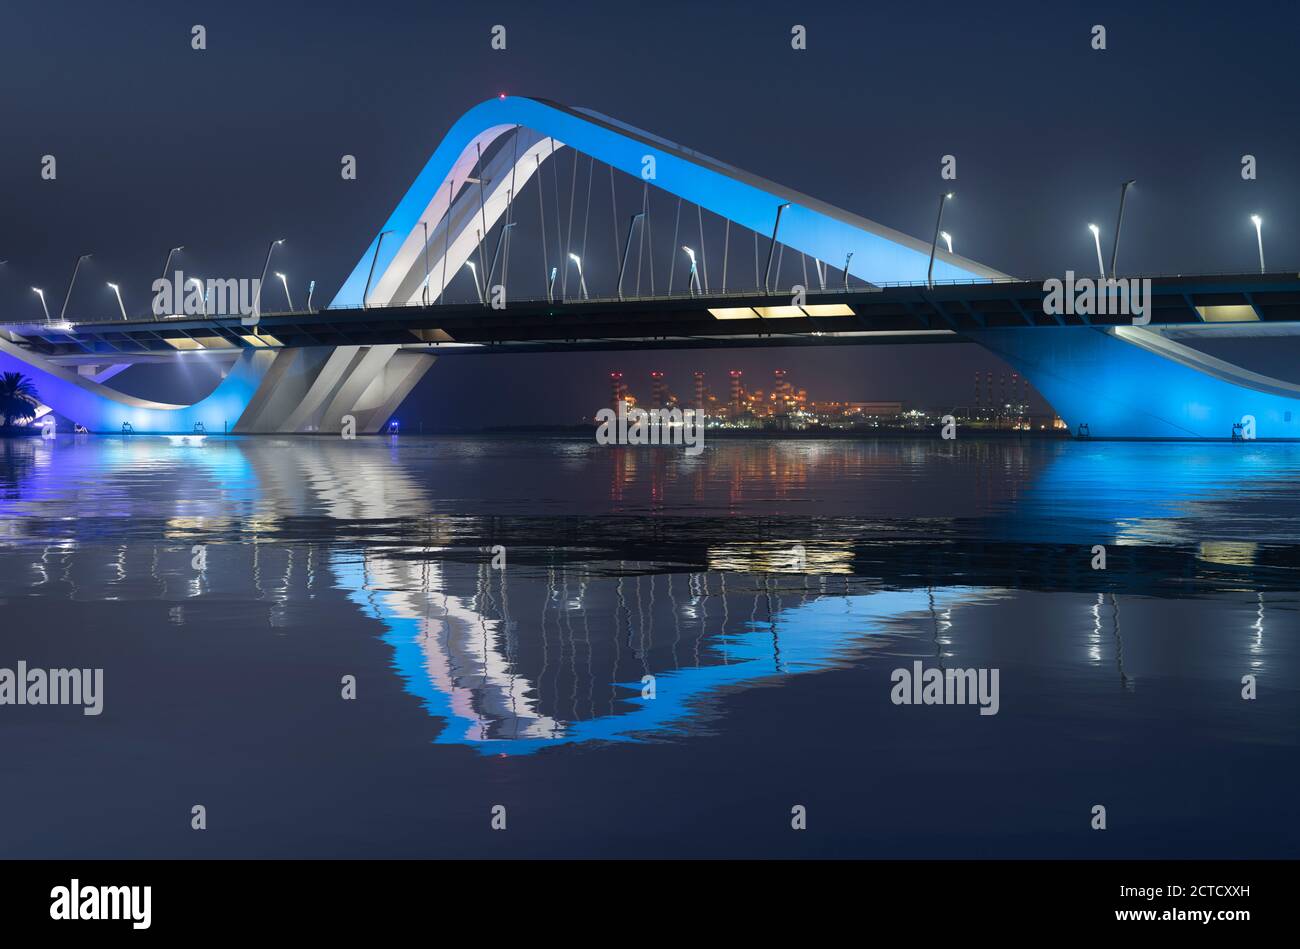 A night shot of the Sheikh Zayed Bridge, Abu Dhabi completed in 2010. Stock Photo